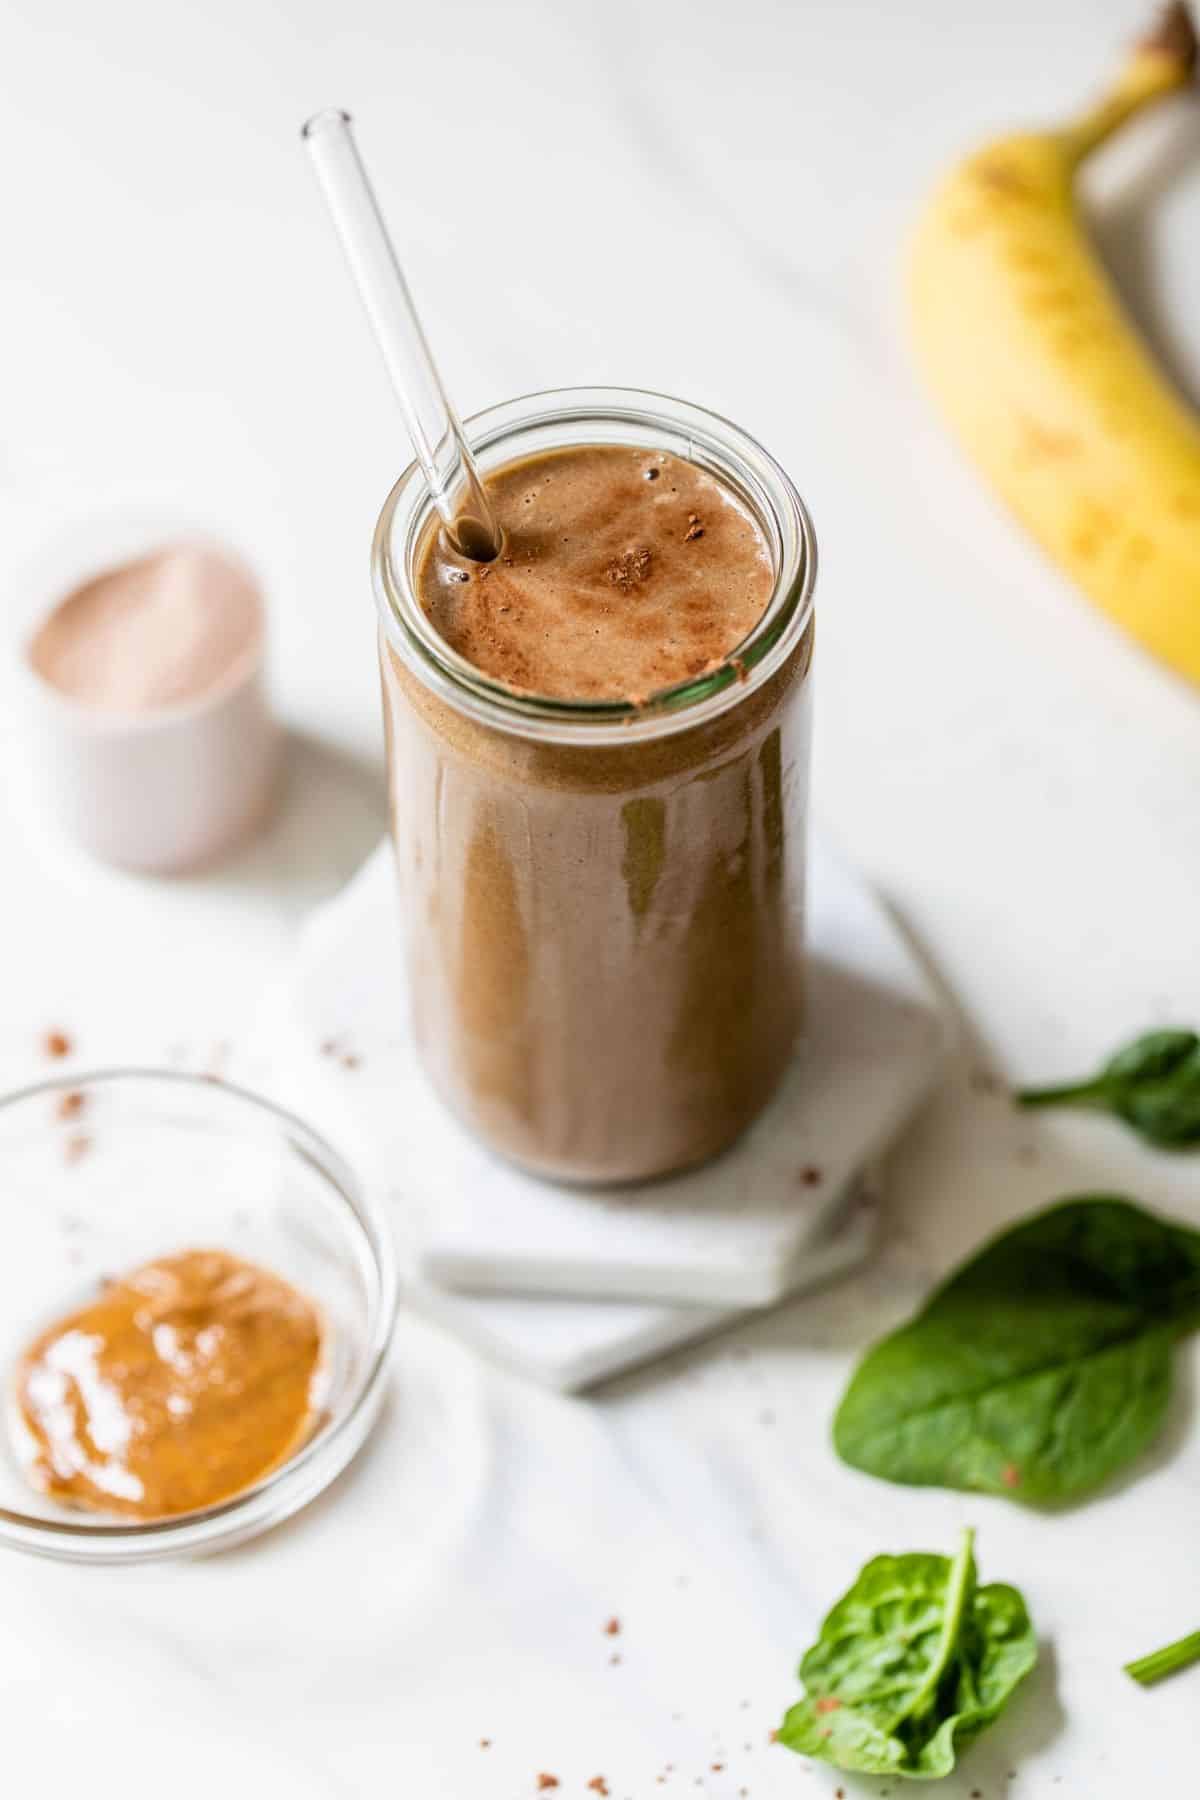 chocolate protein shake in a glass near a banana and spinach leaves